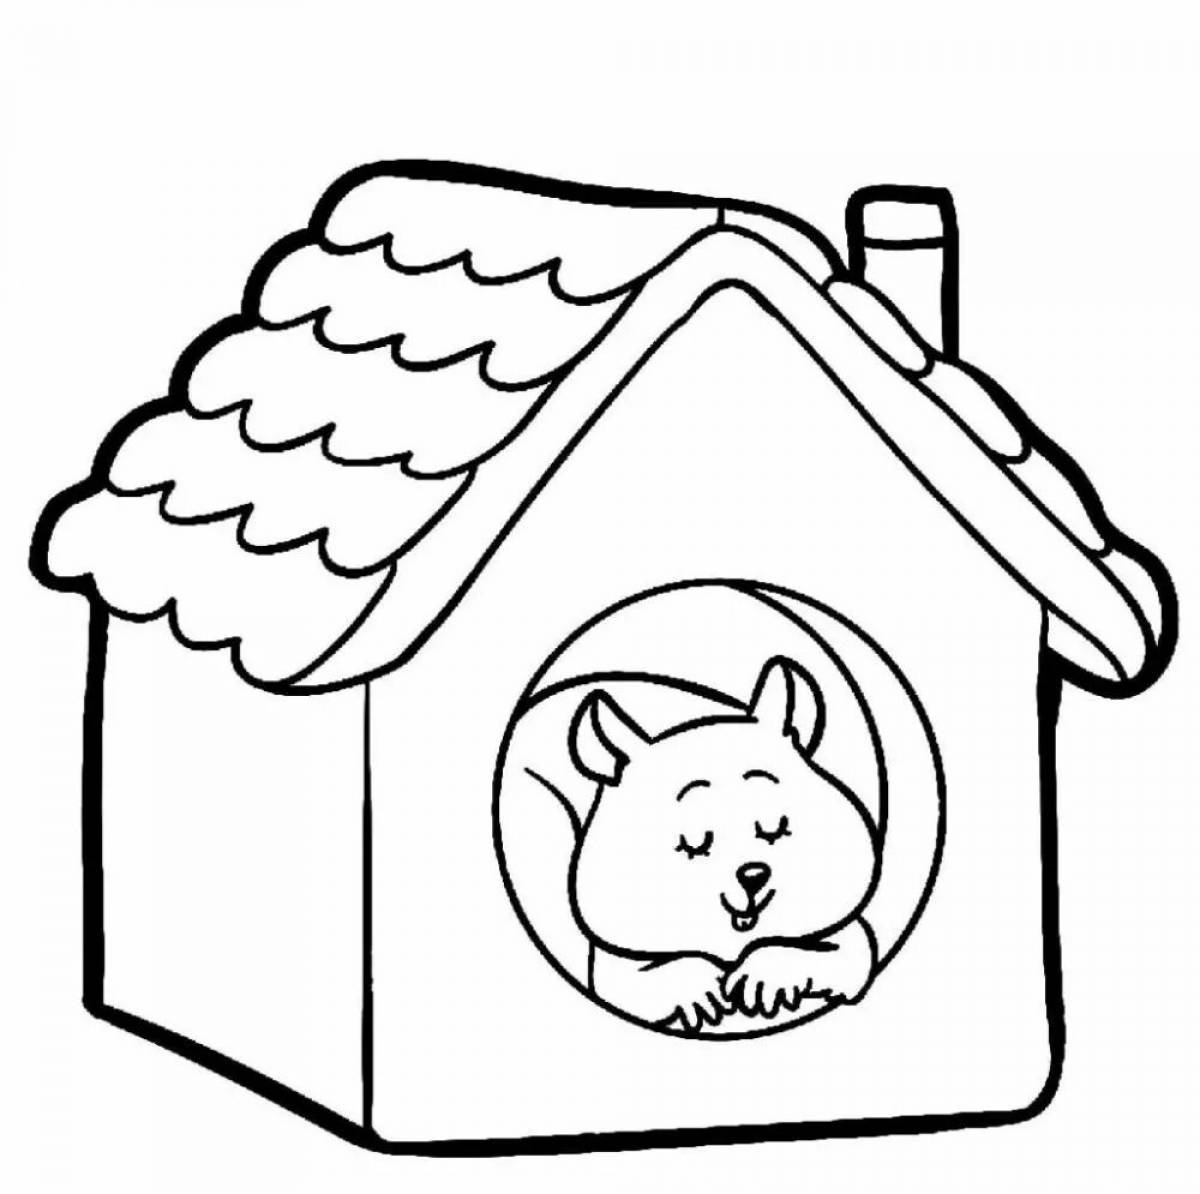 Welcoming cat house